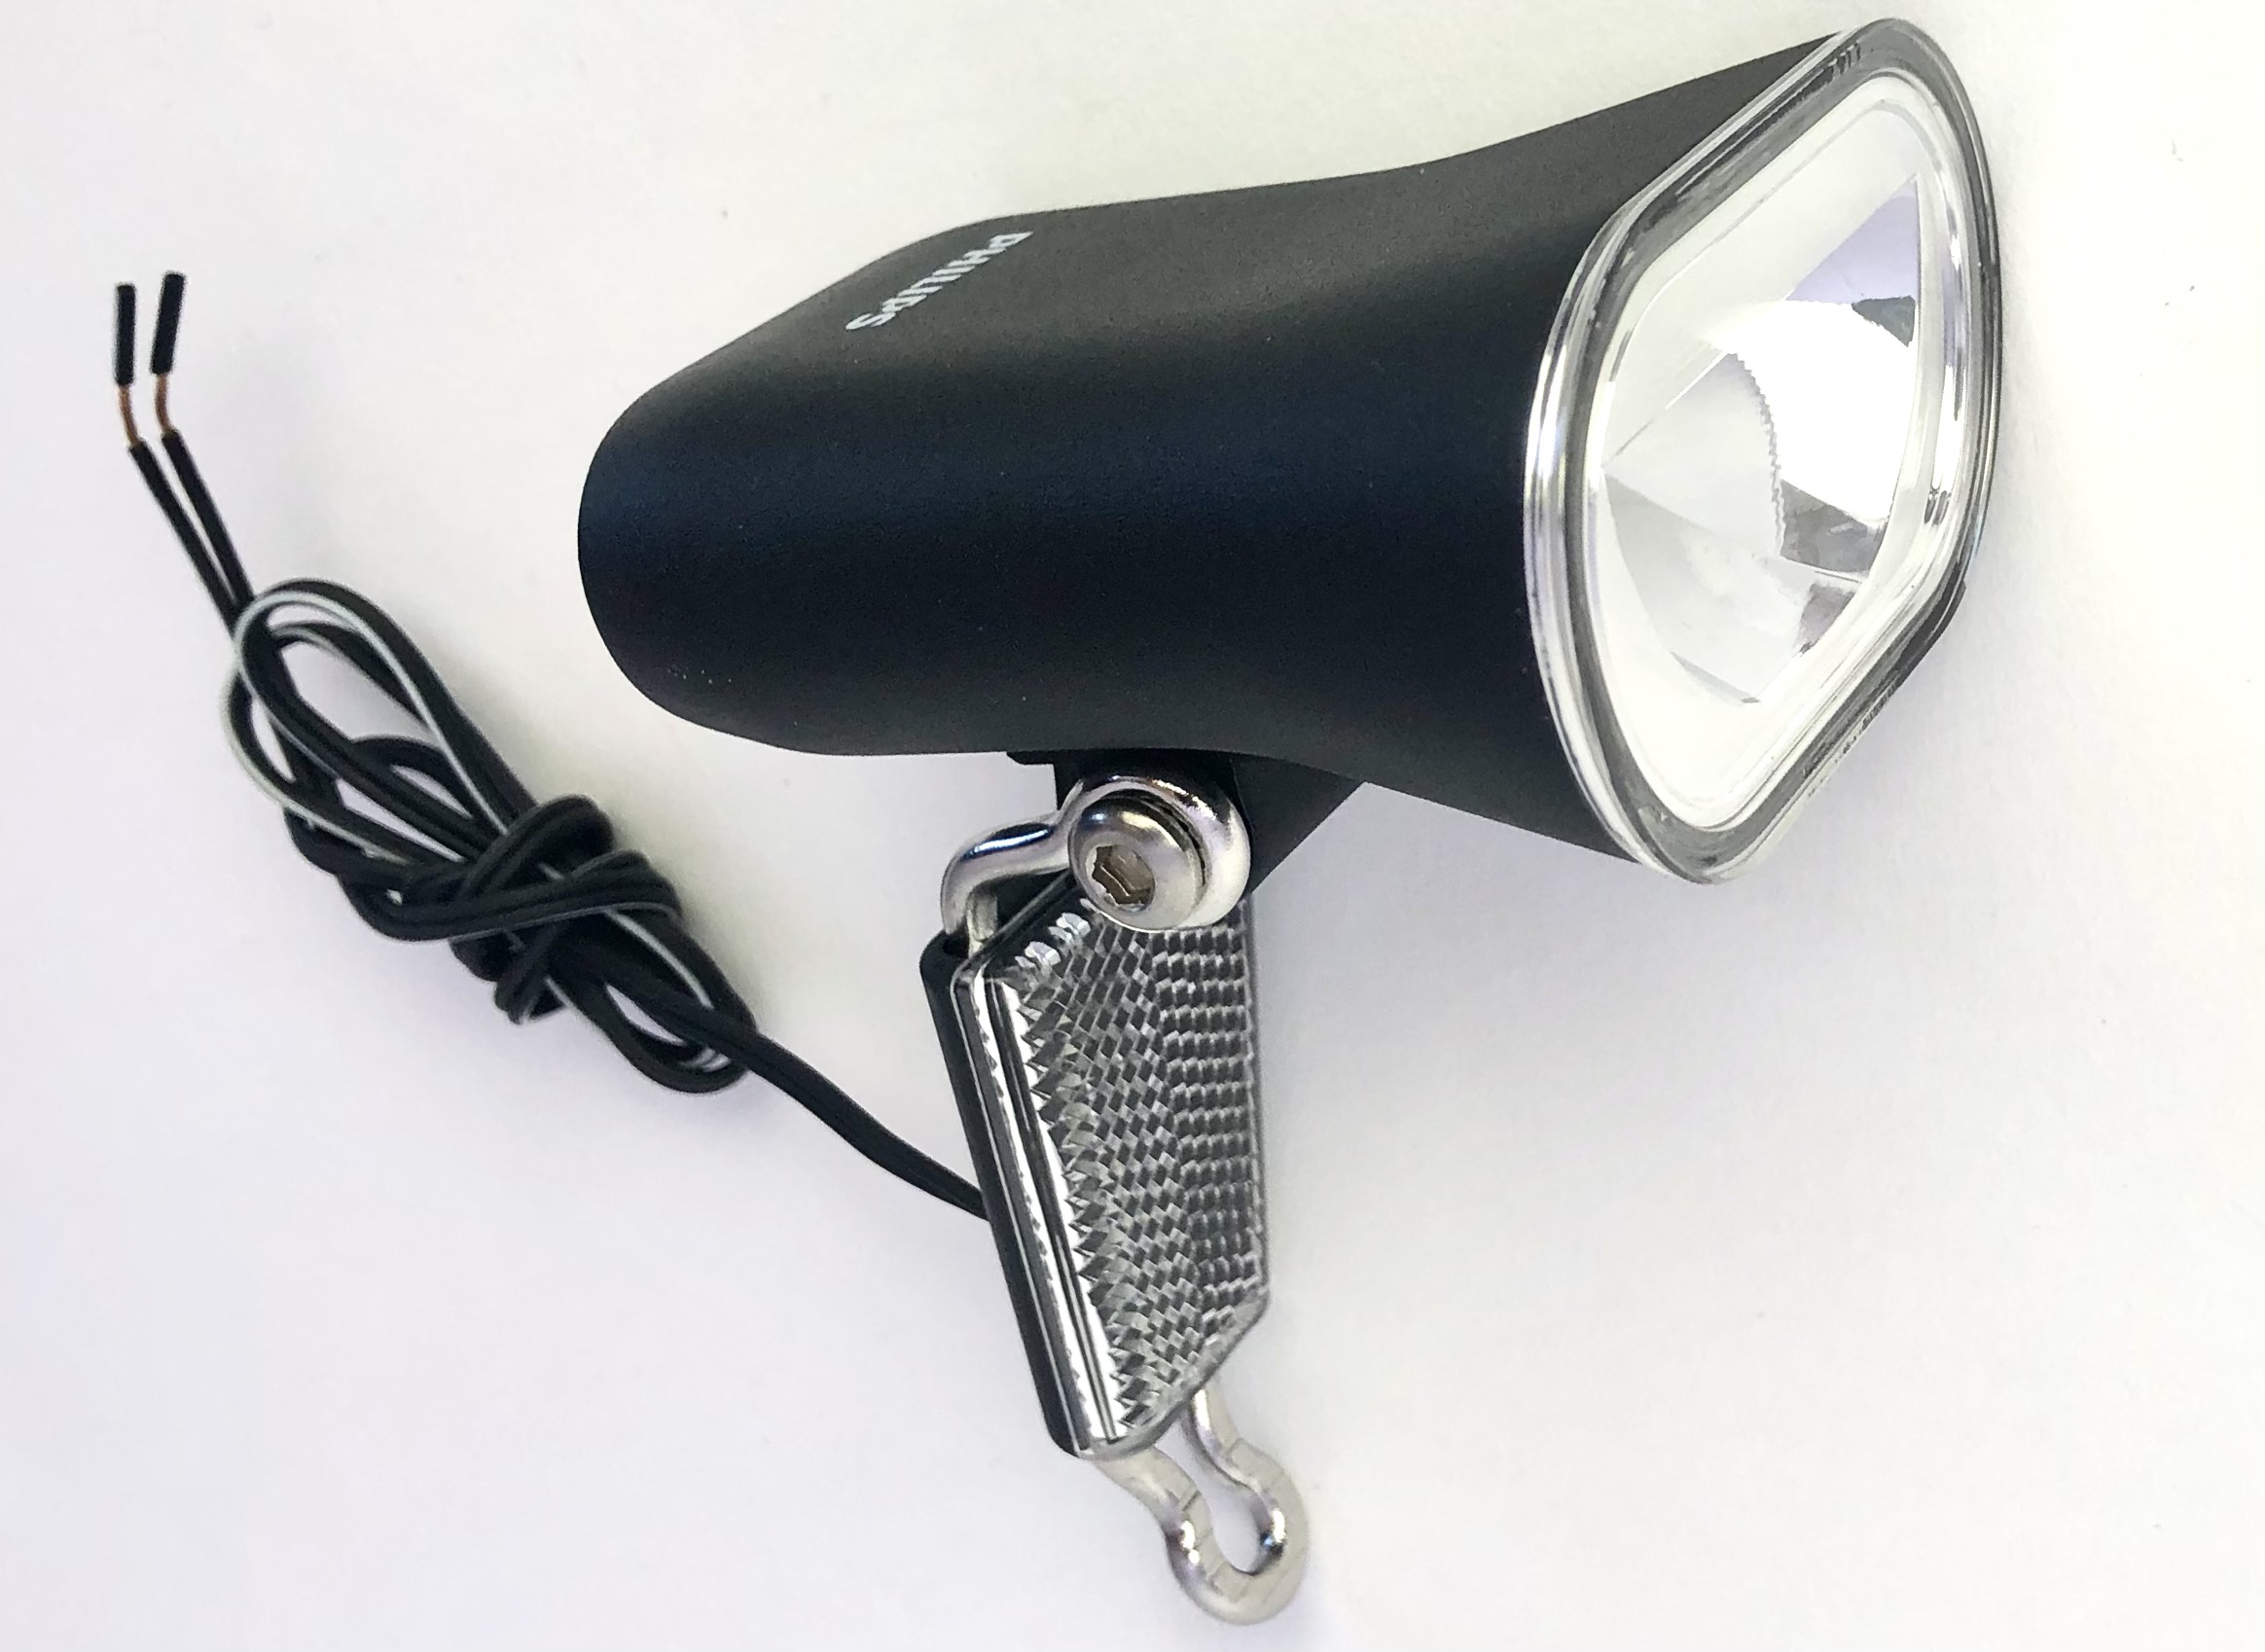 Philips LED E-Bike front lamp, black with reflector, fork mount